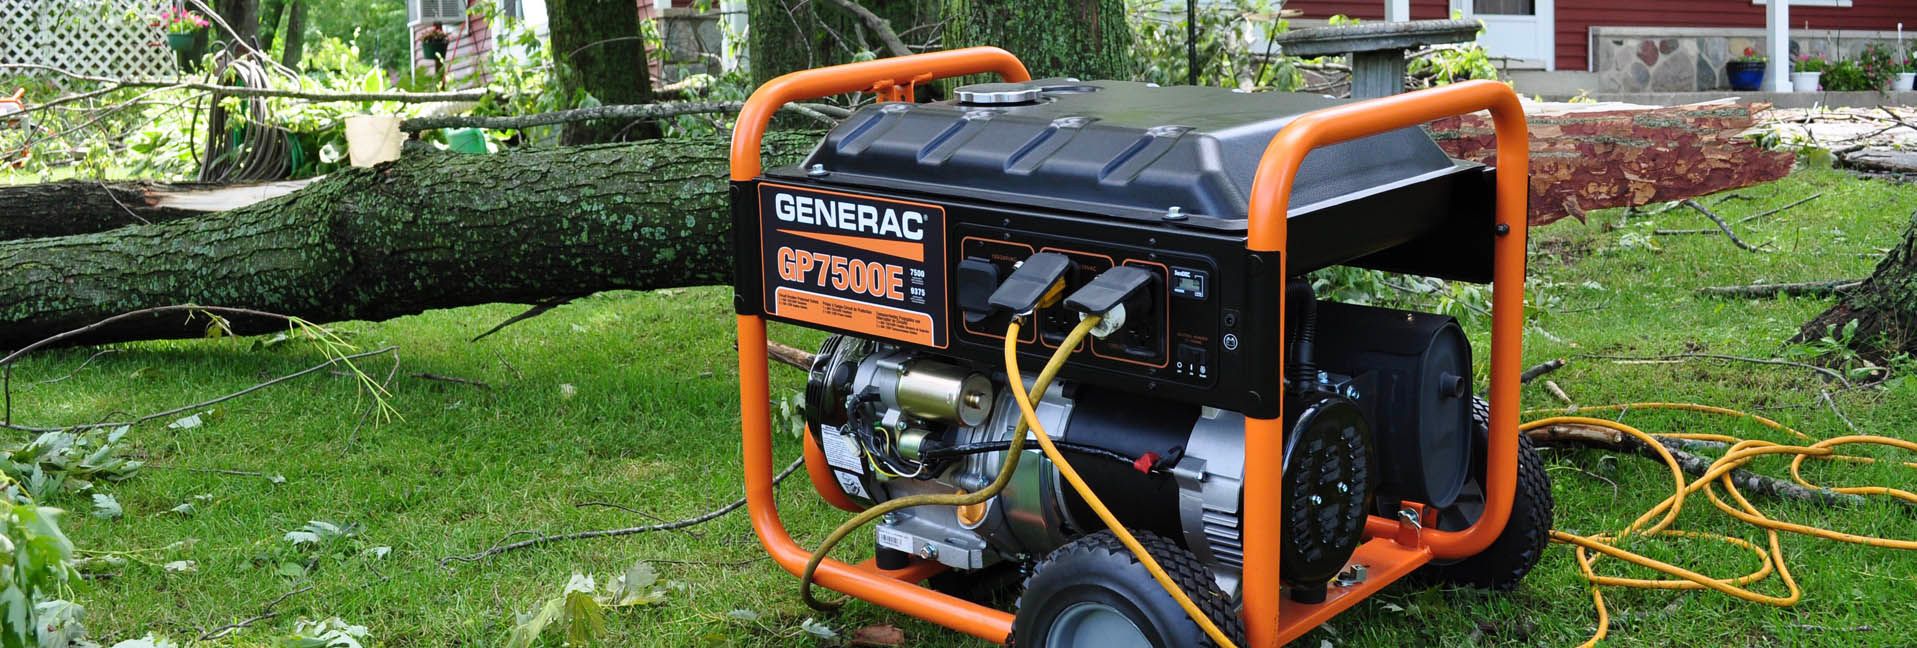 Power, Please - Home and backup generators span many sizes